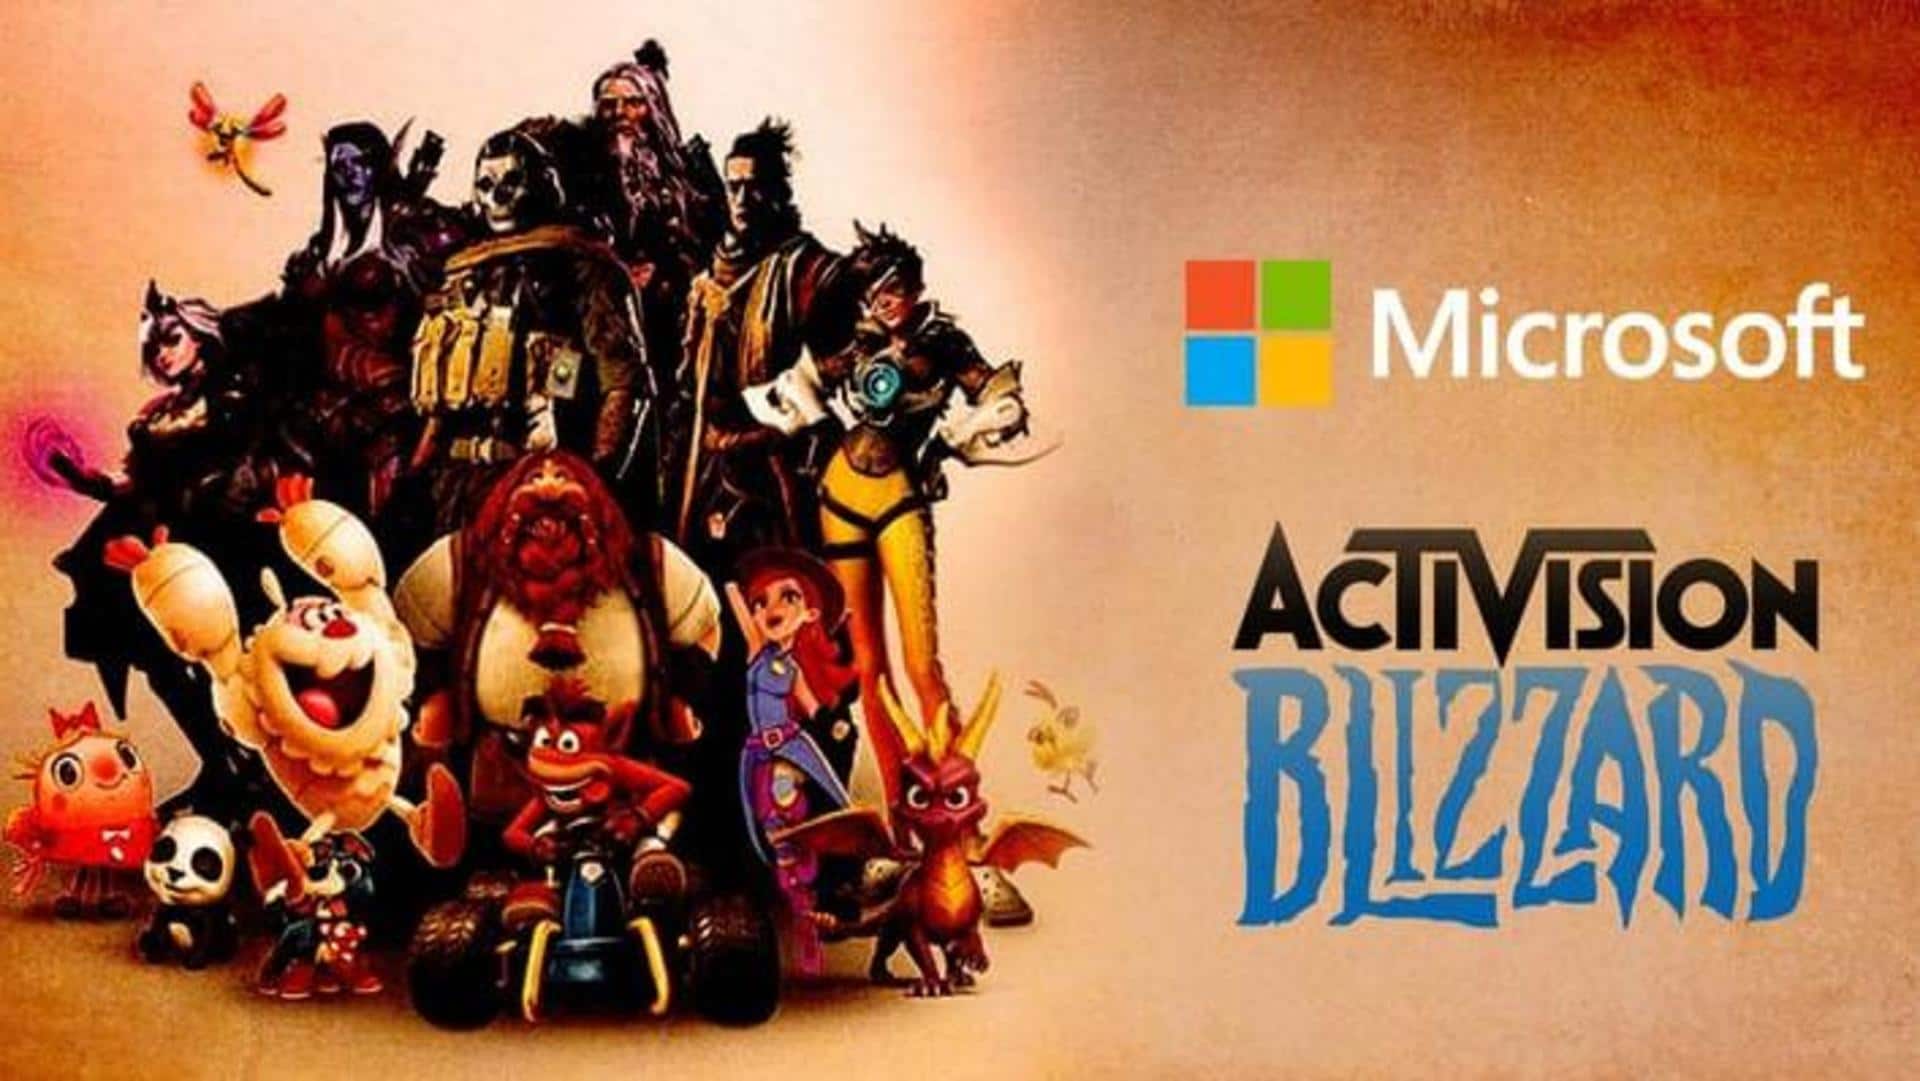 What is the latest in Microsoft's $69bn acquisition of Activision